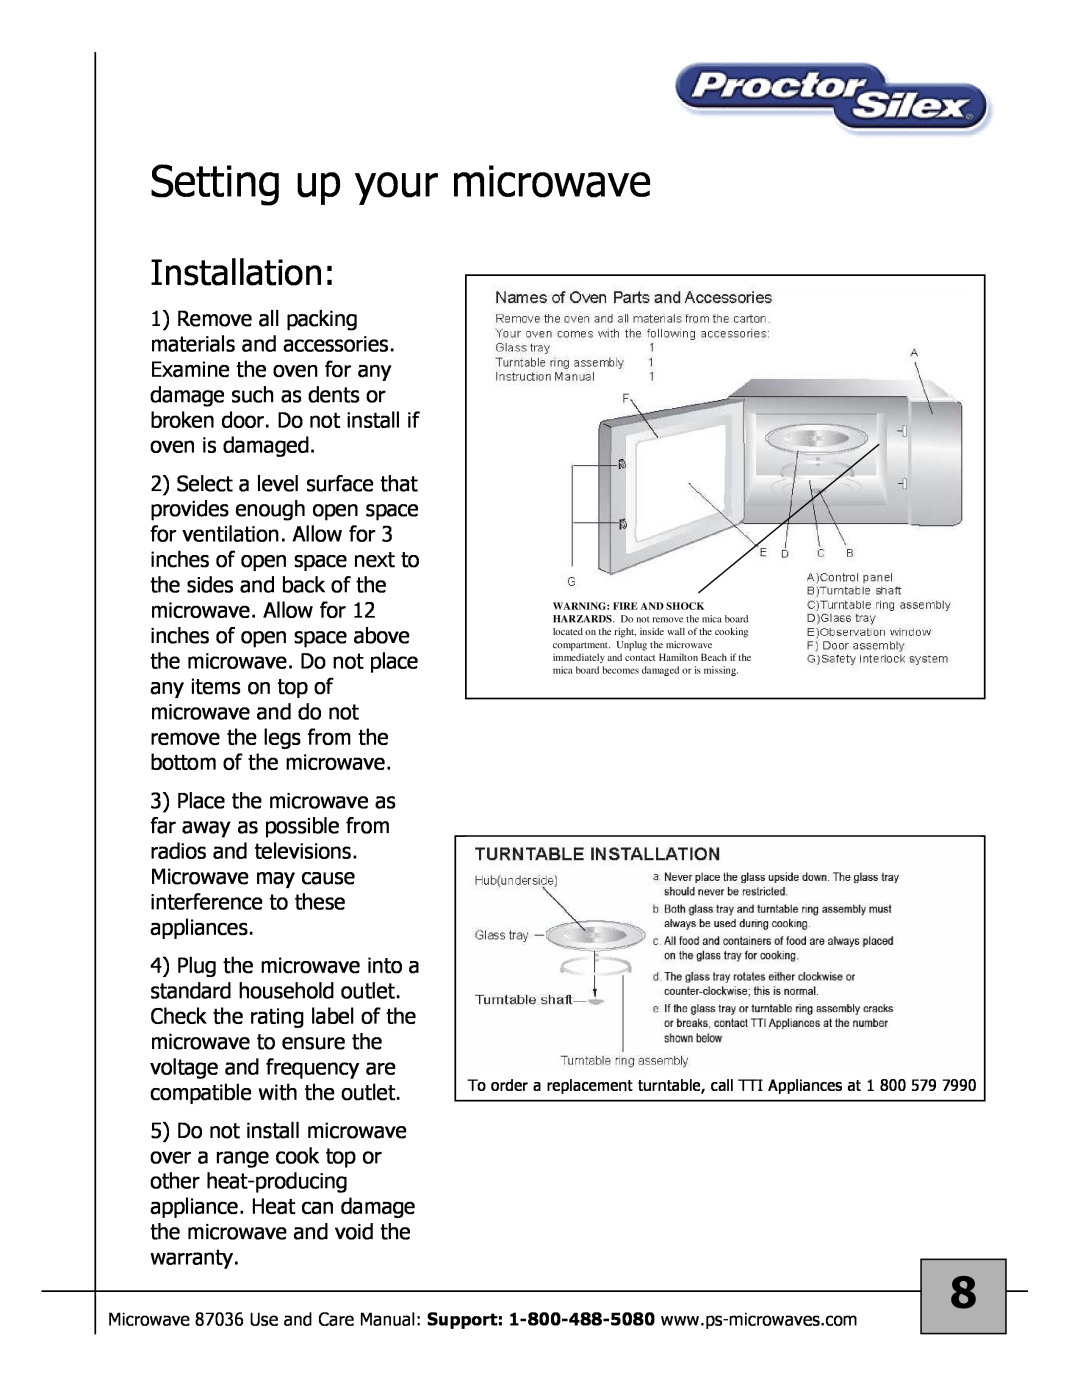 Proctor-Silex 87036 owner manual Setting up your microwave, Installation 